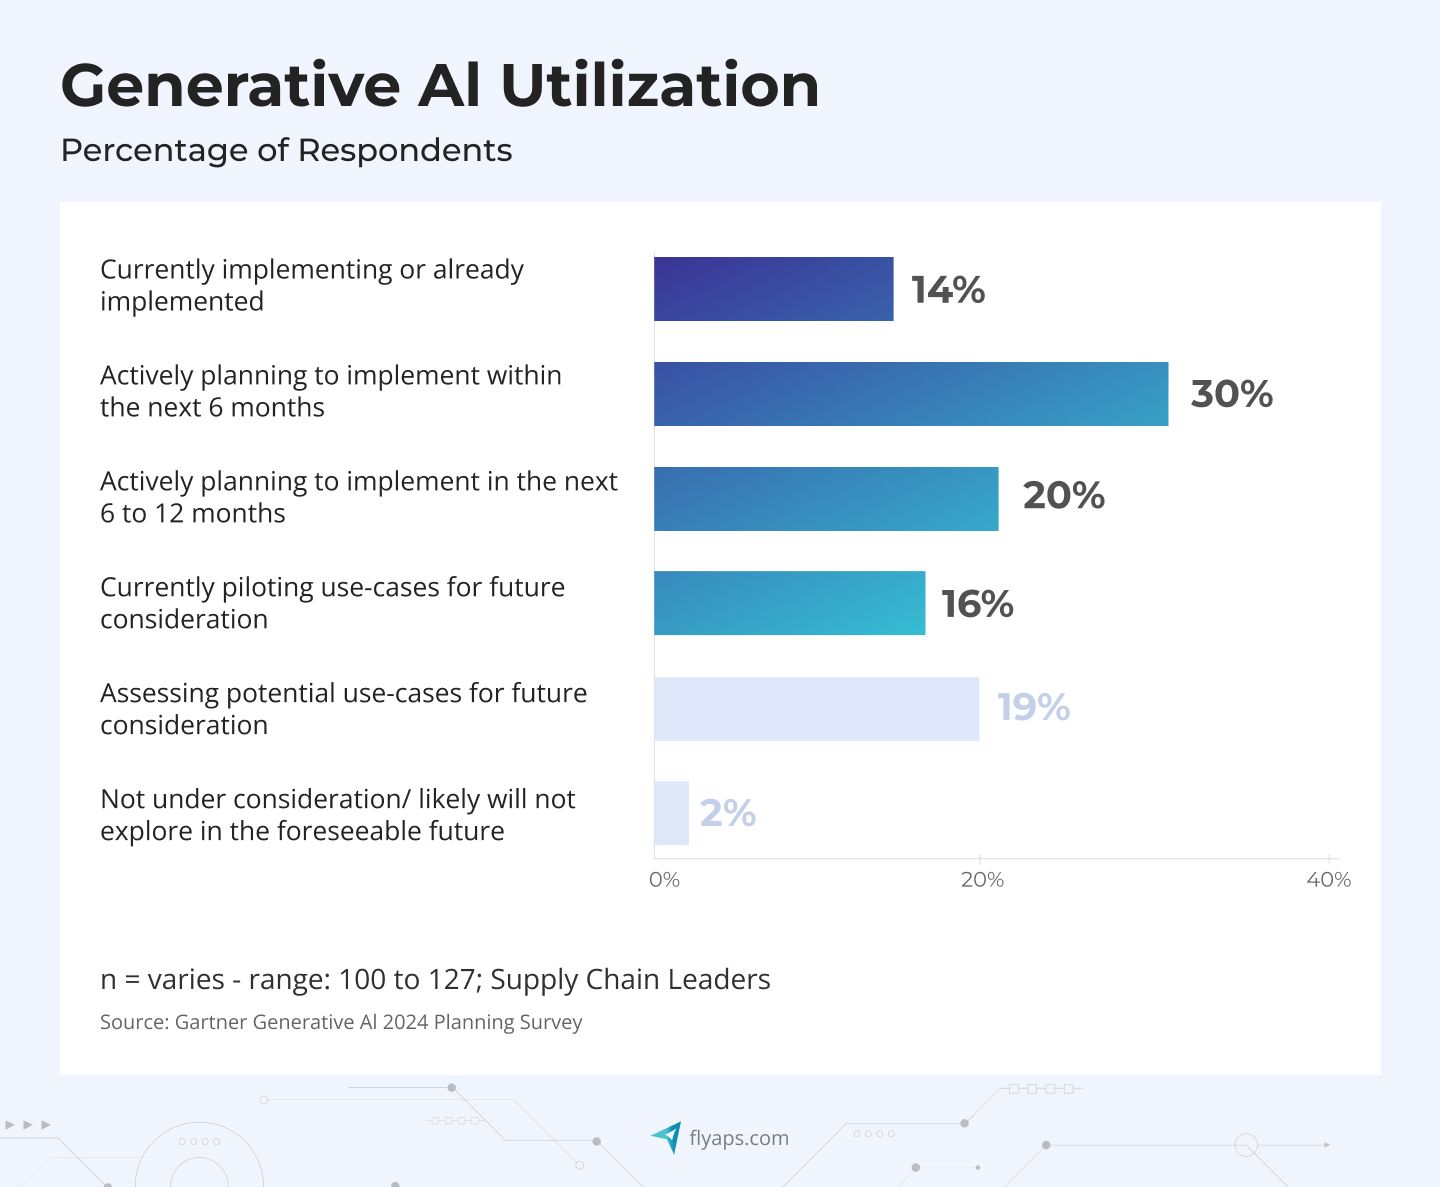 Generative AI Value Chain: Prospects and Predictions for 2024